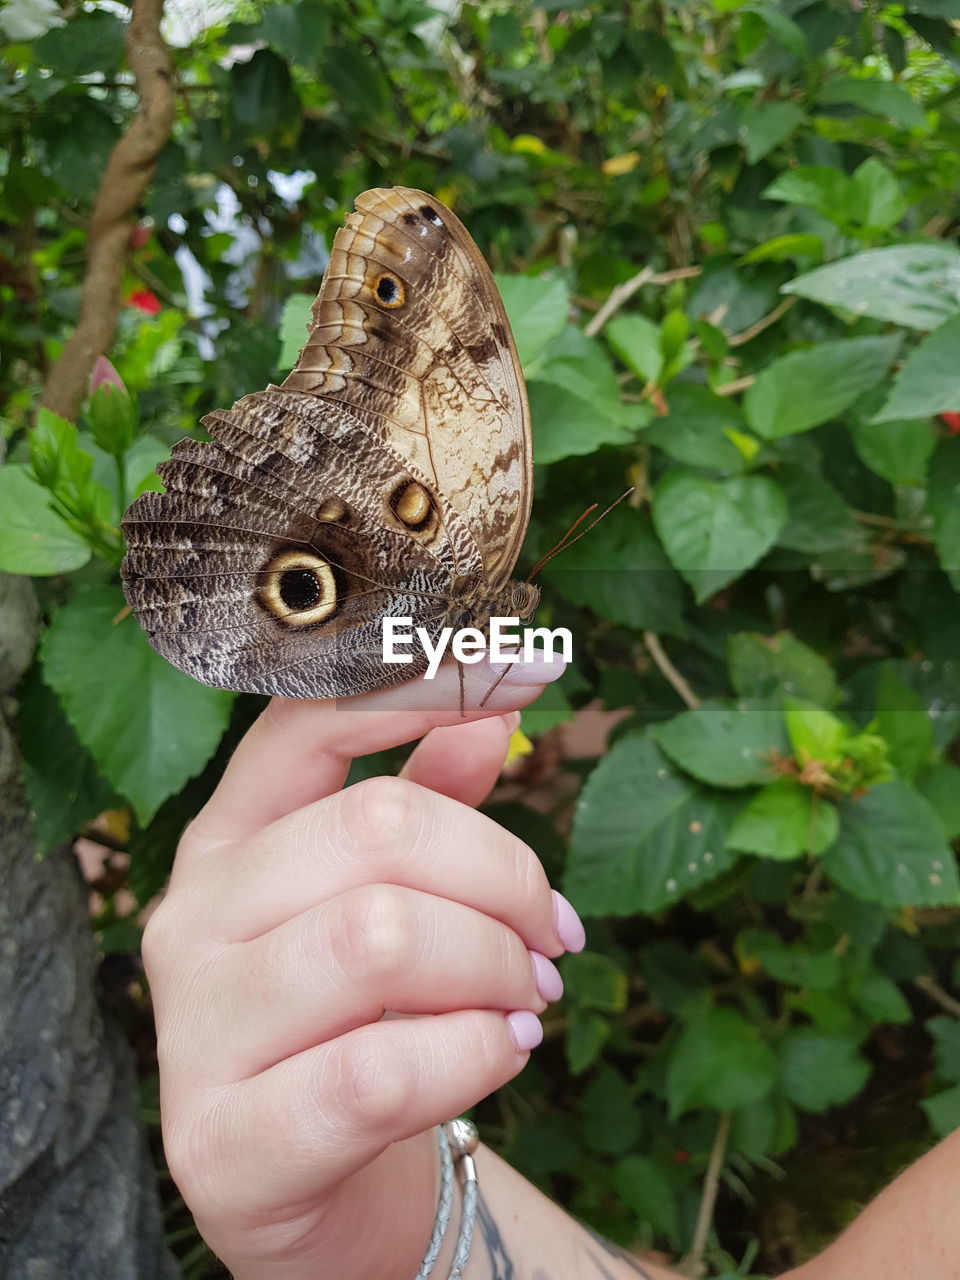 CLOSE-UP OF BUTTERFLY ON HAND HOLDING LEAF